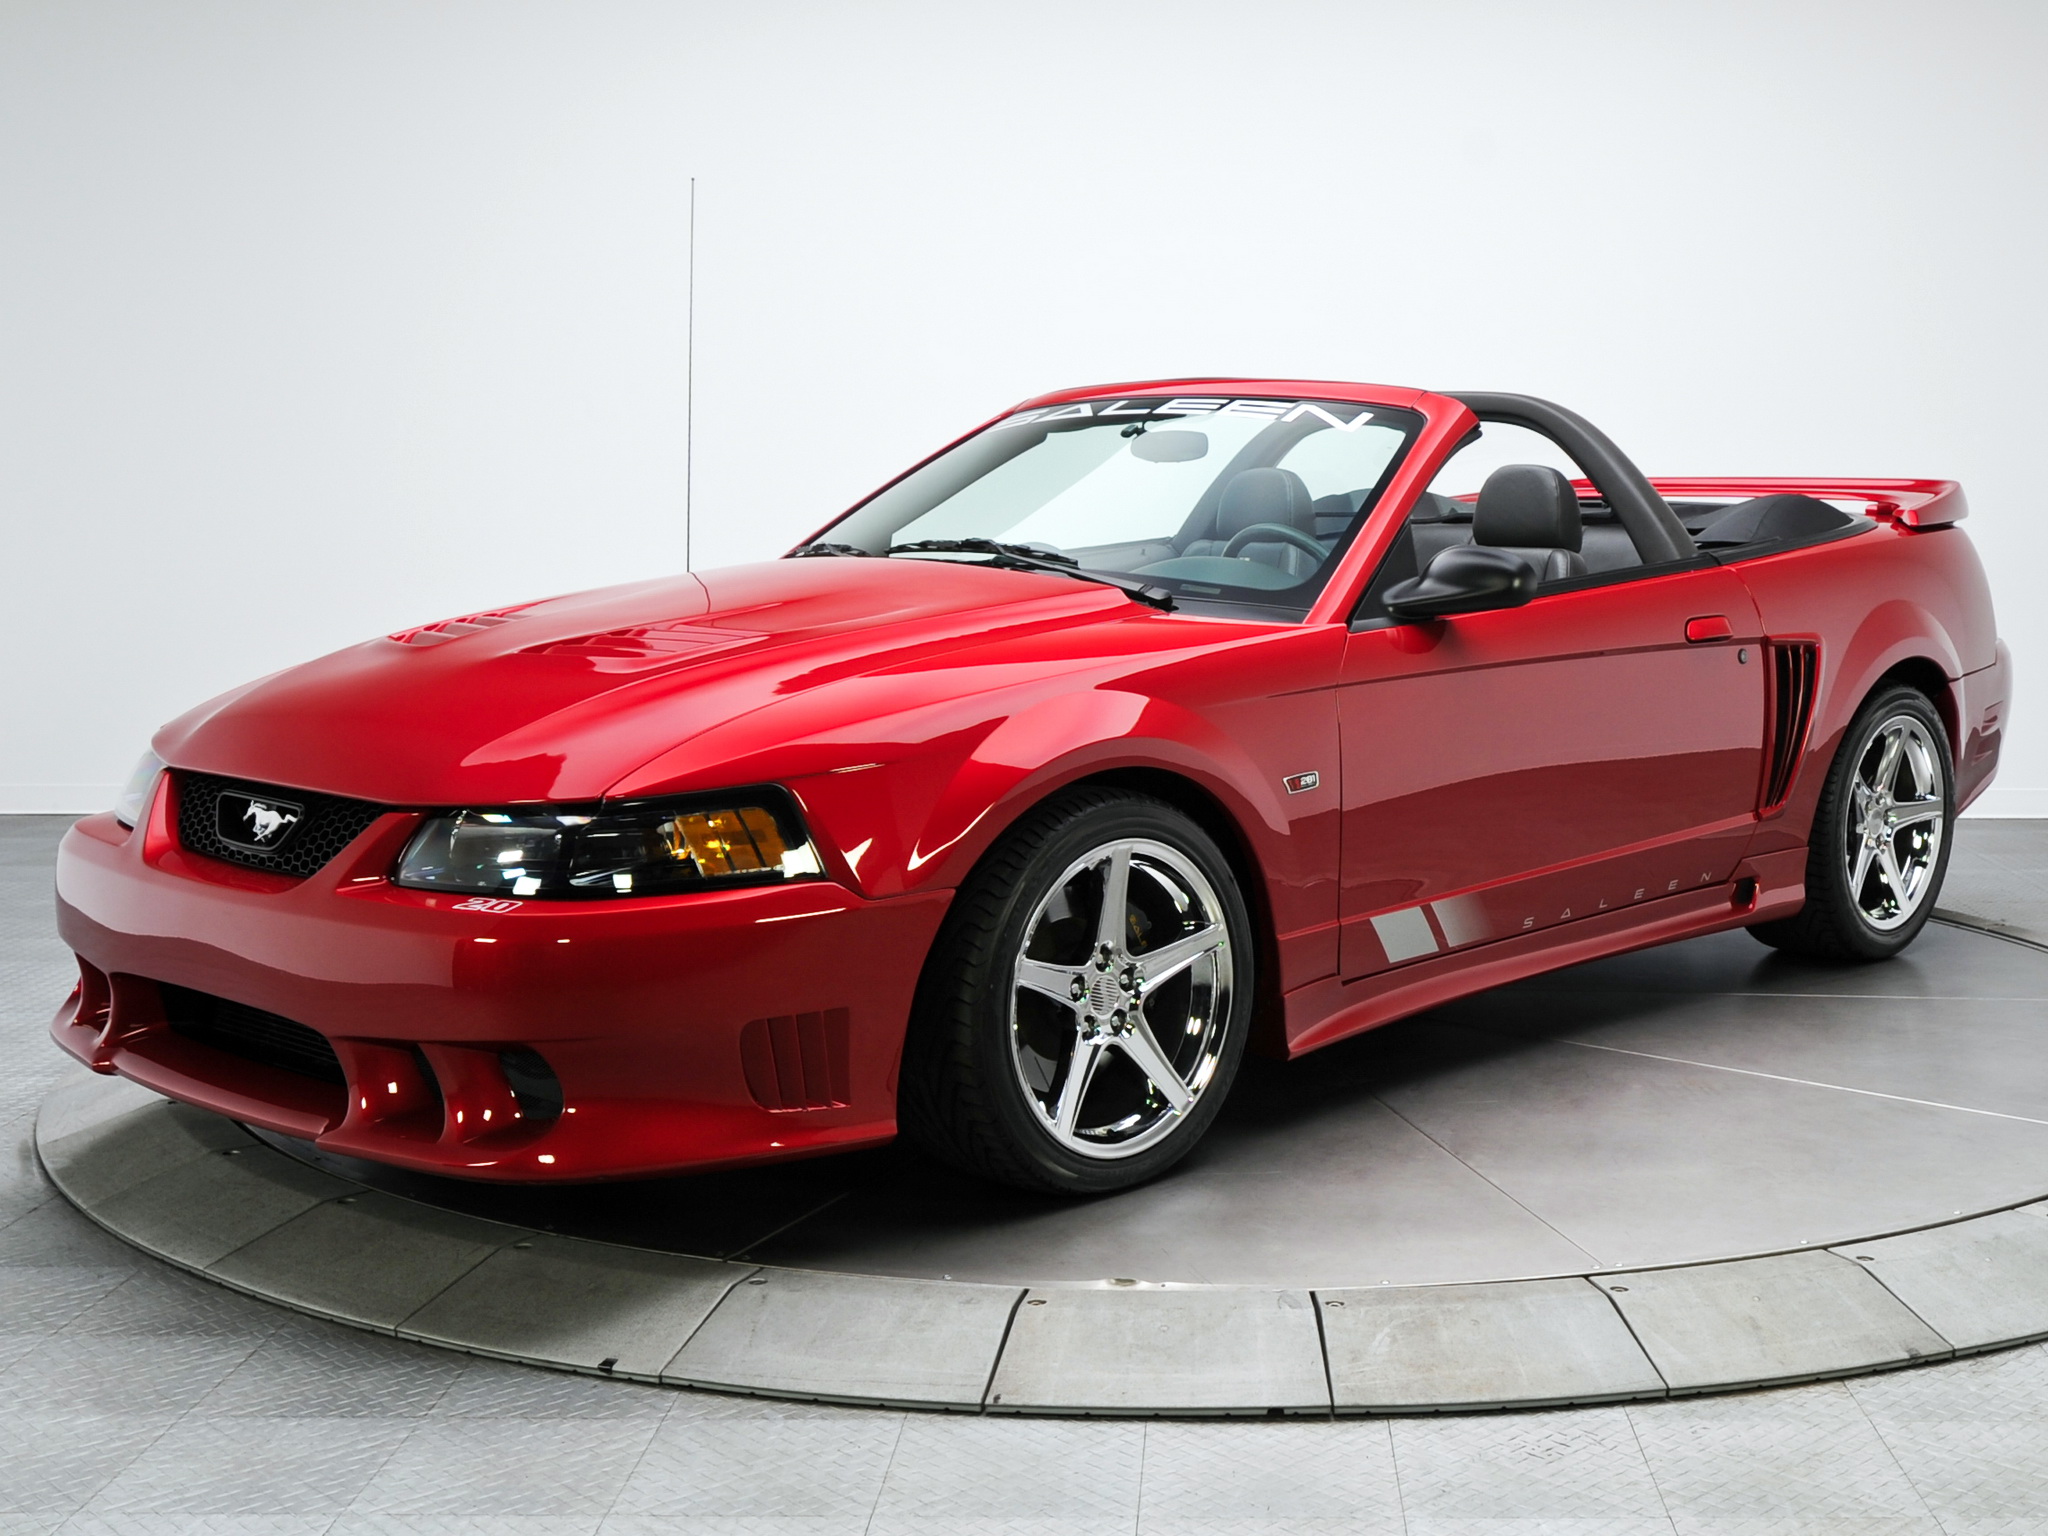 20, 02saleen, S281, Sc, Extreme, Convertible, Supercar, Supercars, Muscle, S c, Ford, Mustang Wallpaper